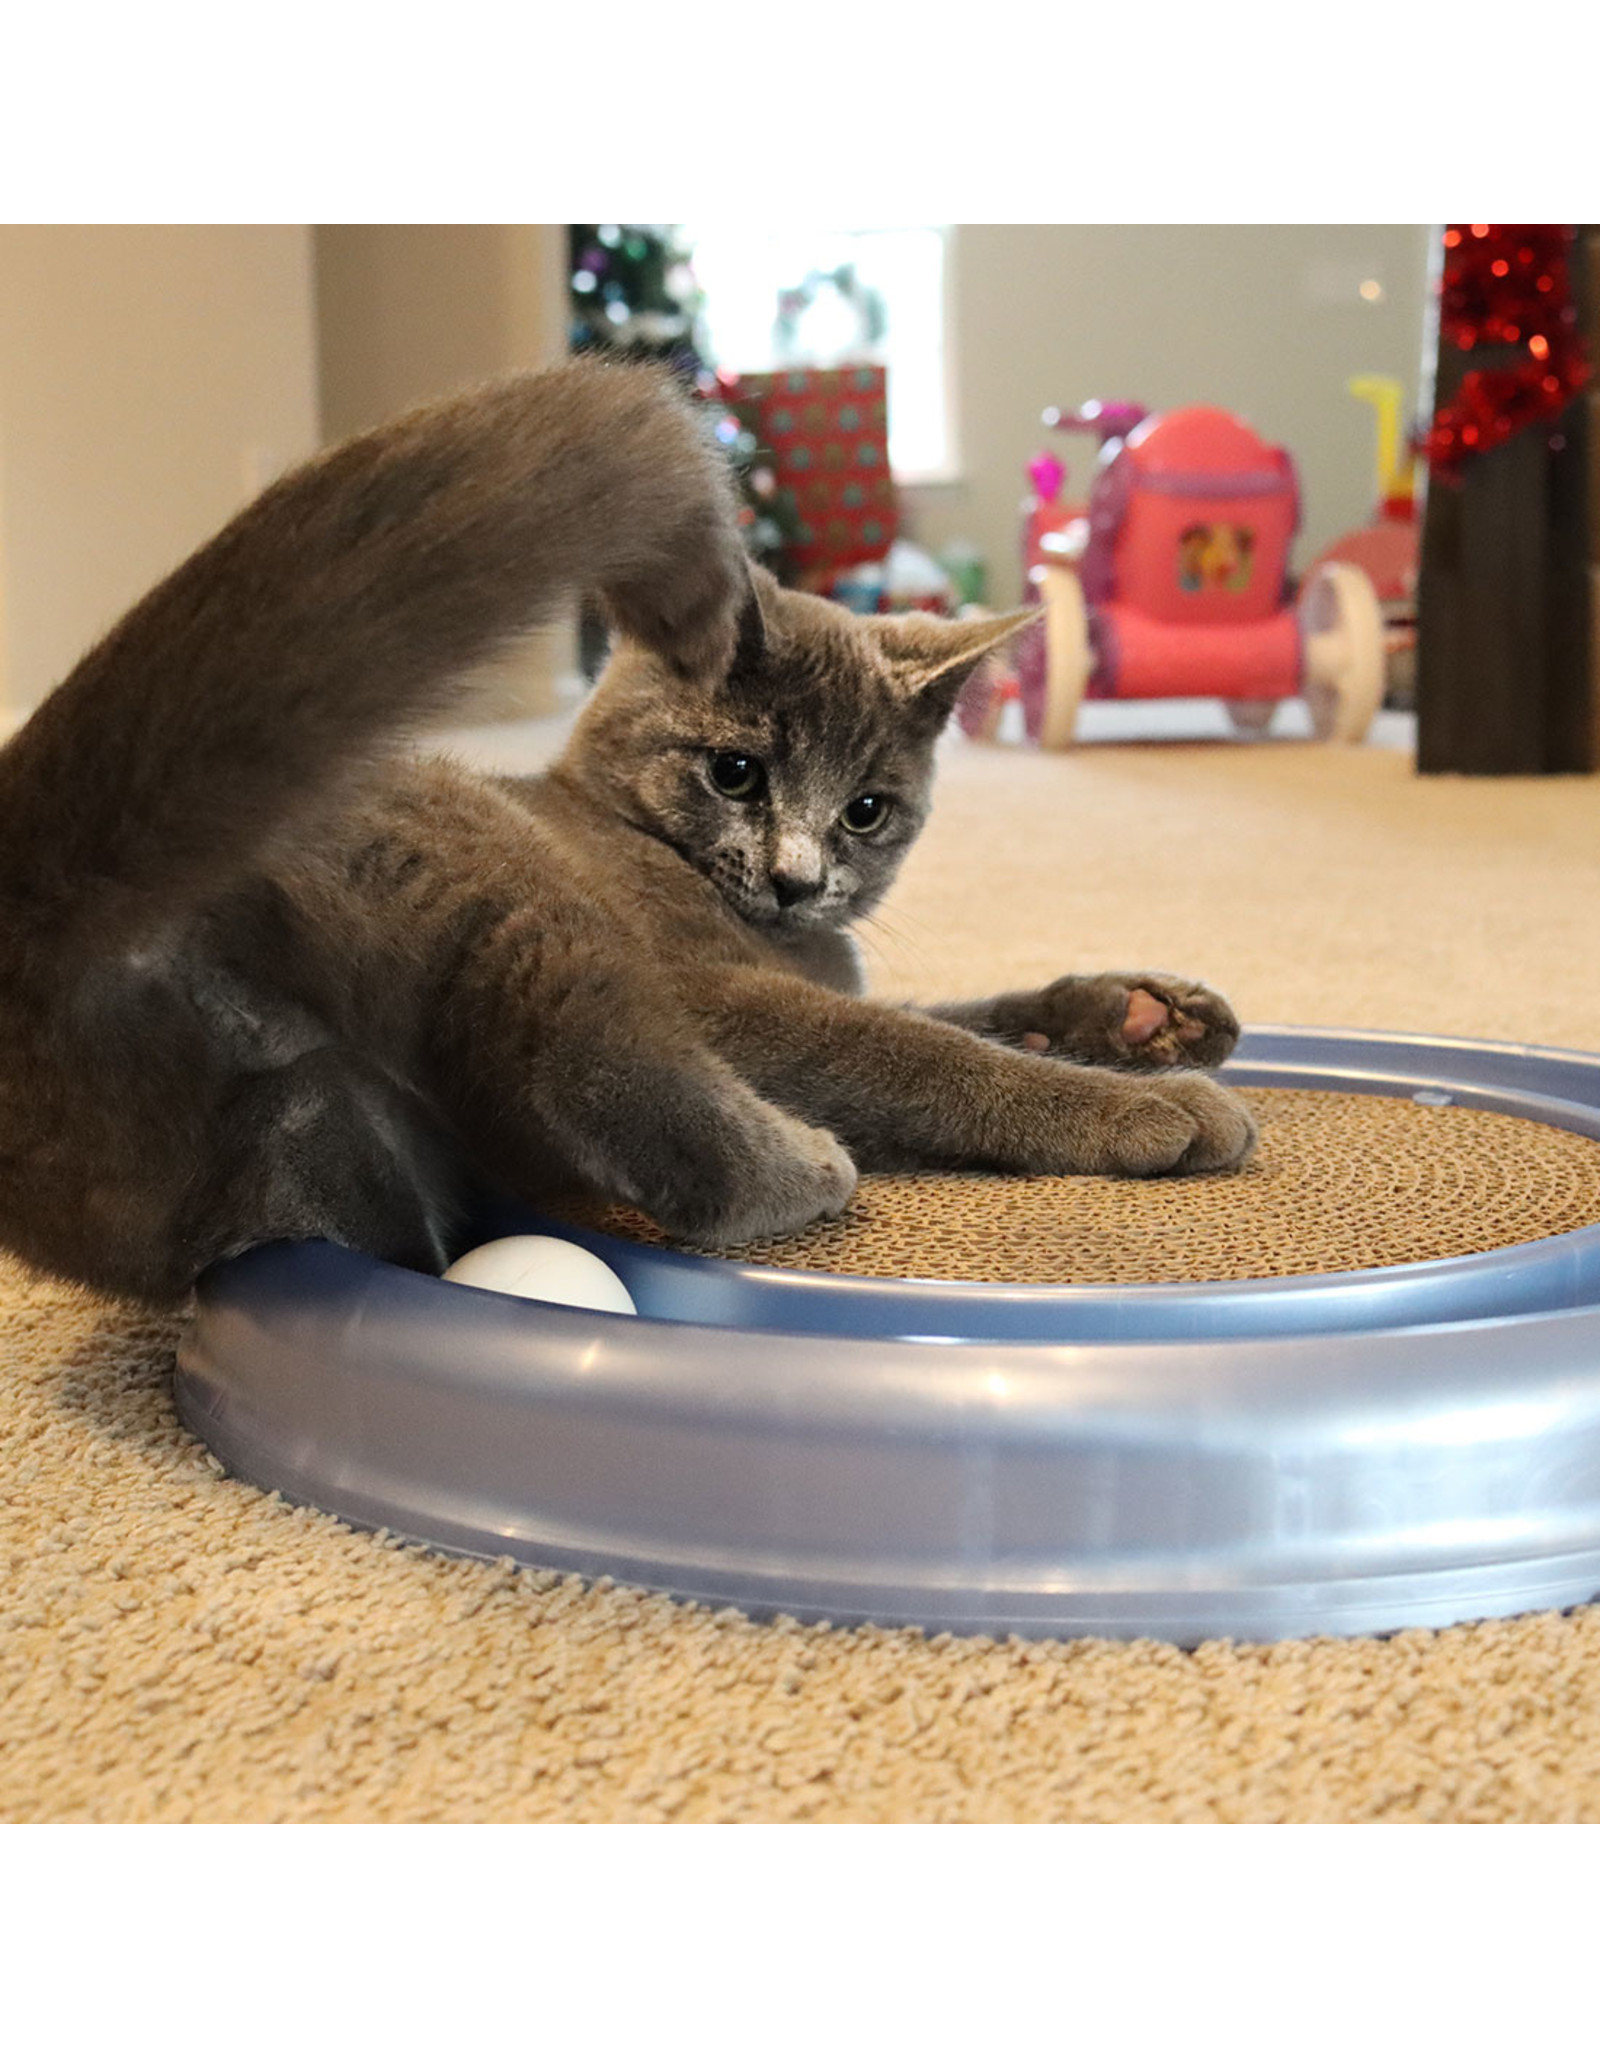 Turbo by Coastal Turbo Chaser Ball Track and Scratching Cat Toy with Catnip